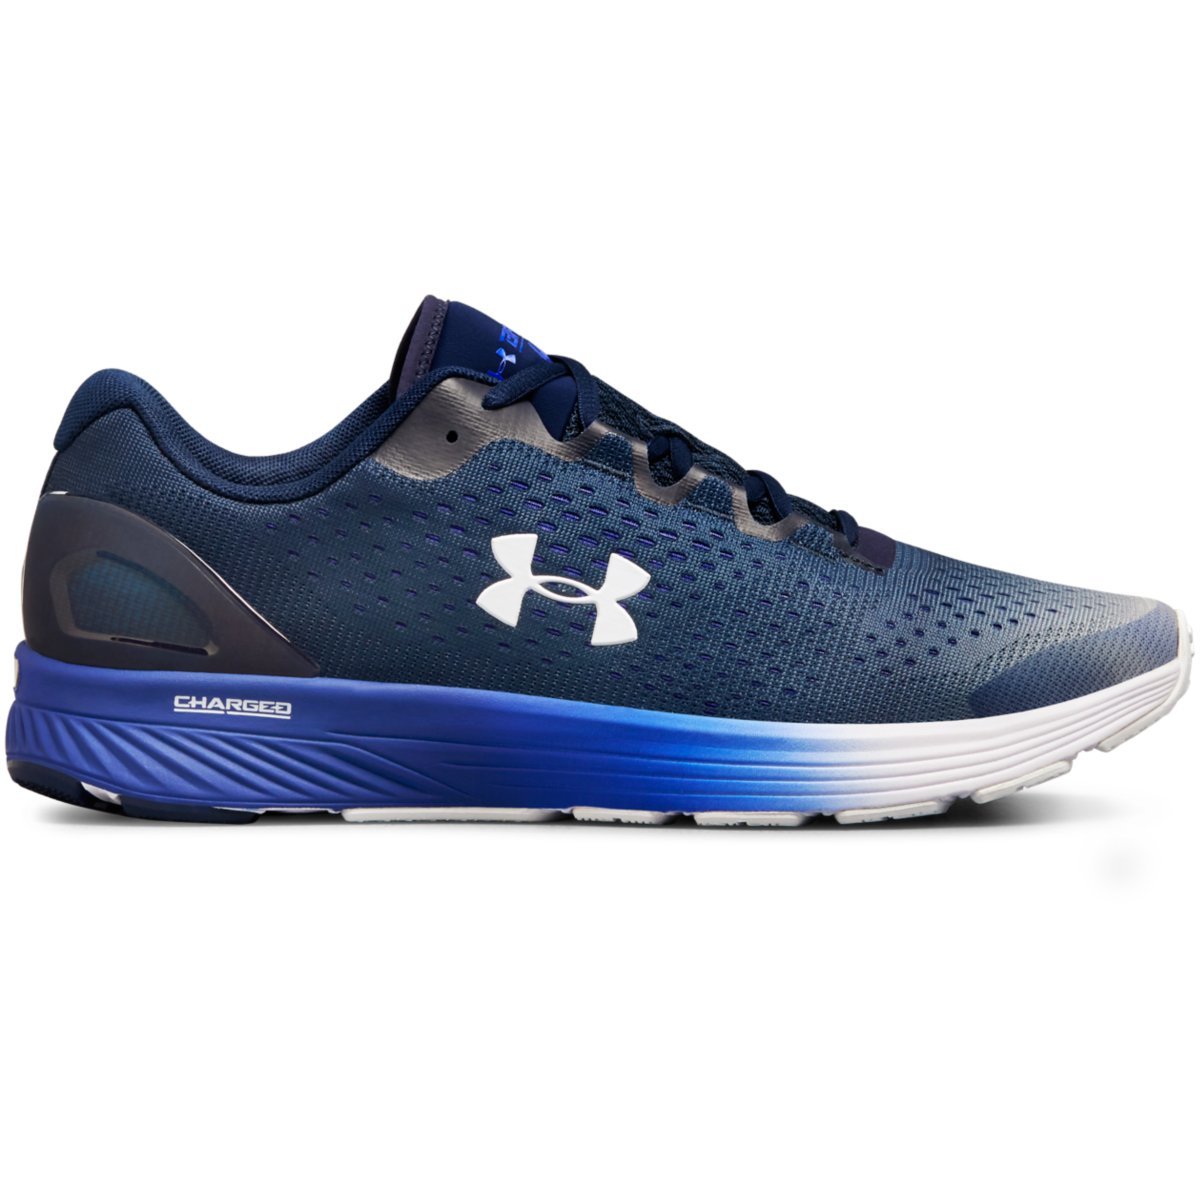 Under Armour Men's Ua Charged Bandit 4 Running Shoes - Blue, 10.5